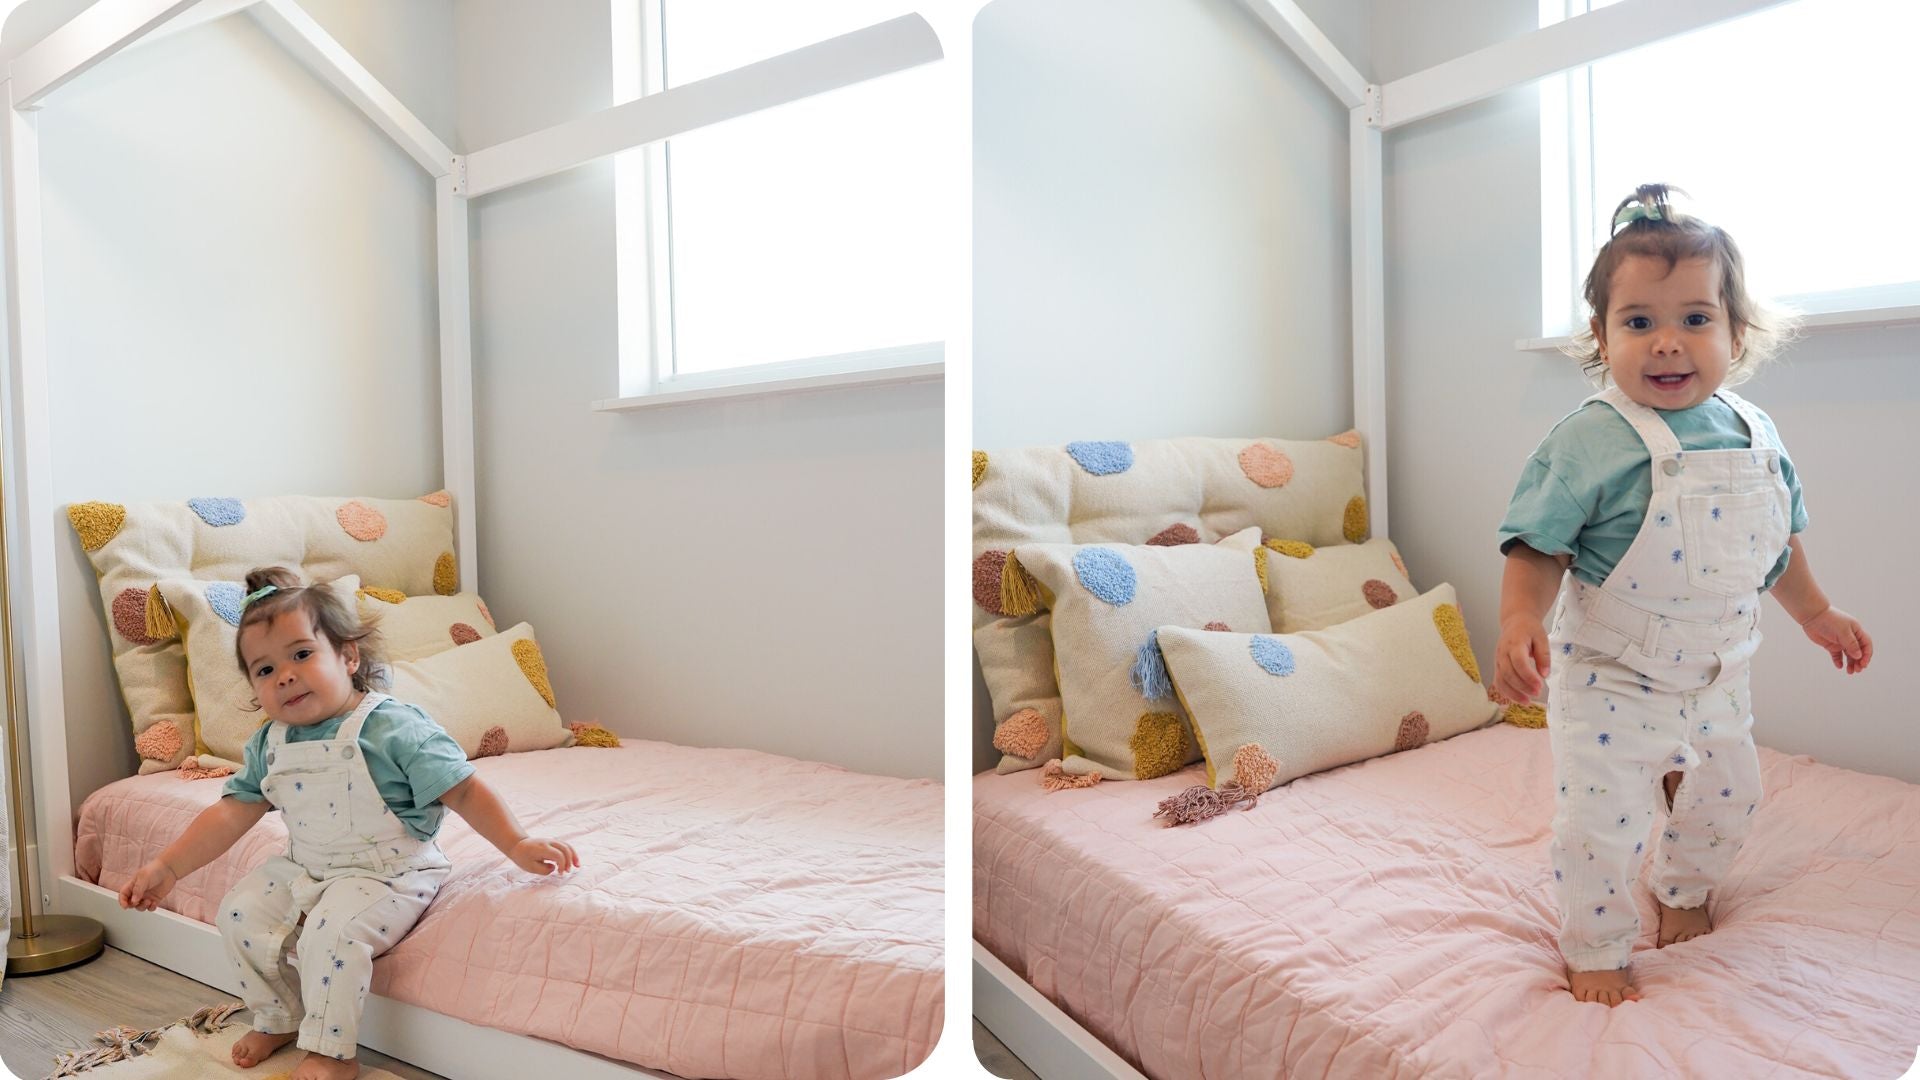 White solid wood house bed for kids